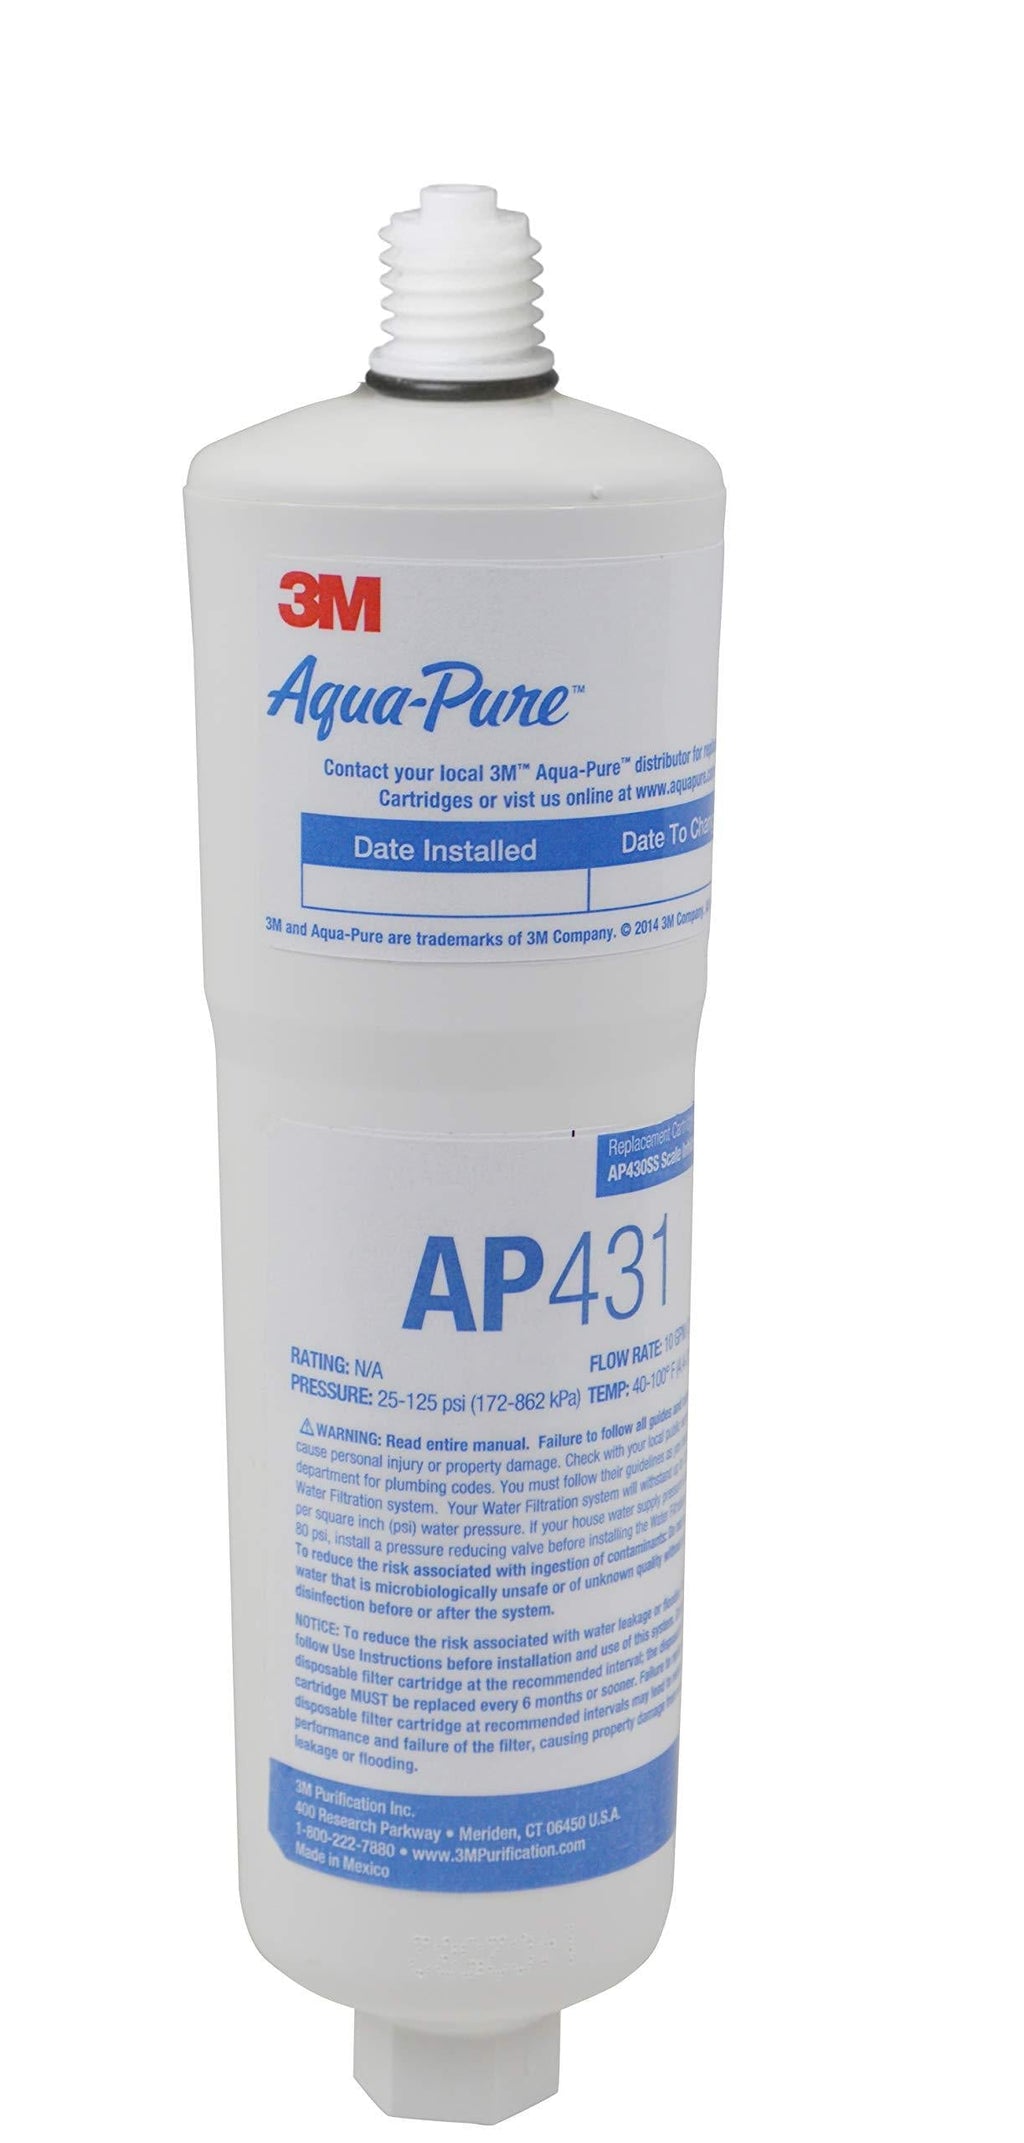 3M Aqua-Pure Whole House Scale Inhibition Inline Replacement Water Cartridge AP431, For Aqua-Pure System AP430SS, Helps Prevent Scale Buildup On Hot Water Heaters, Boilers, Plumbing Pipes and Fixtures Replacement Cartridge - NewNest Australia